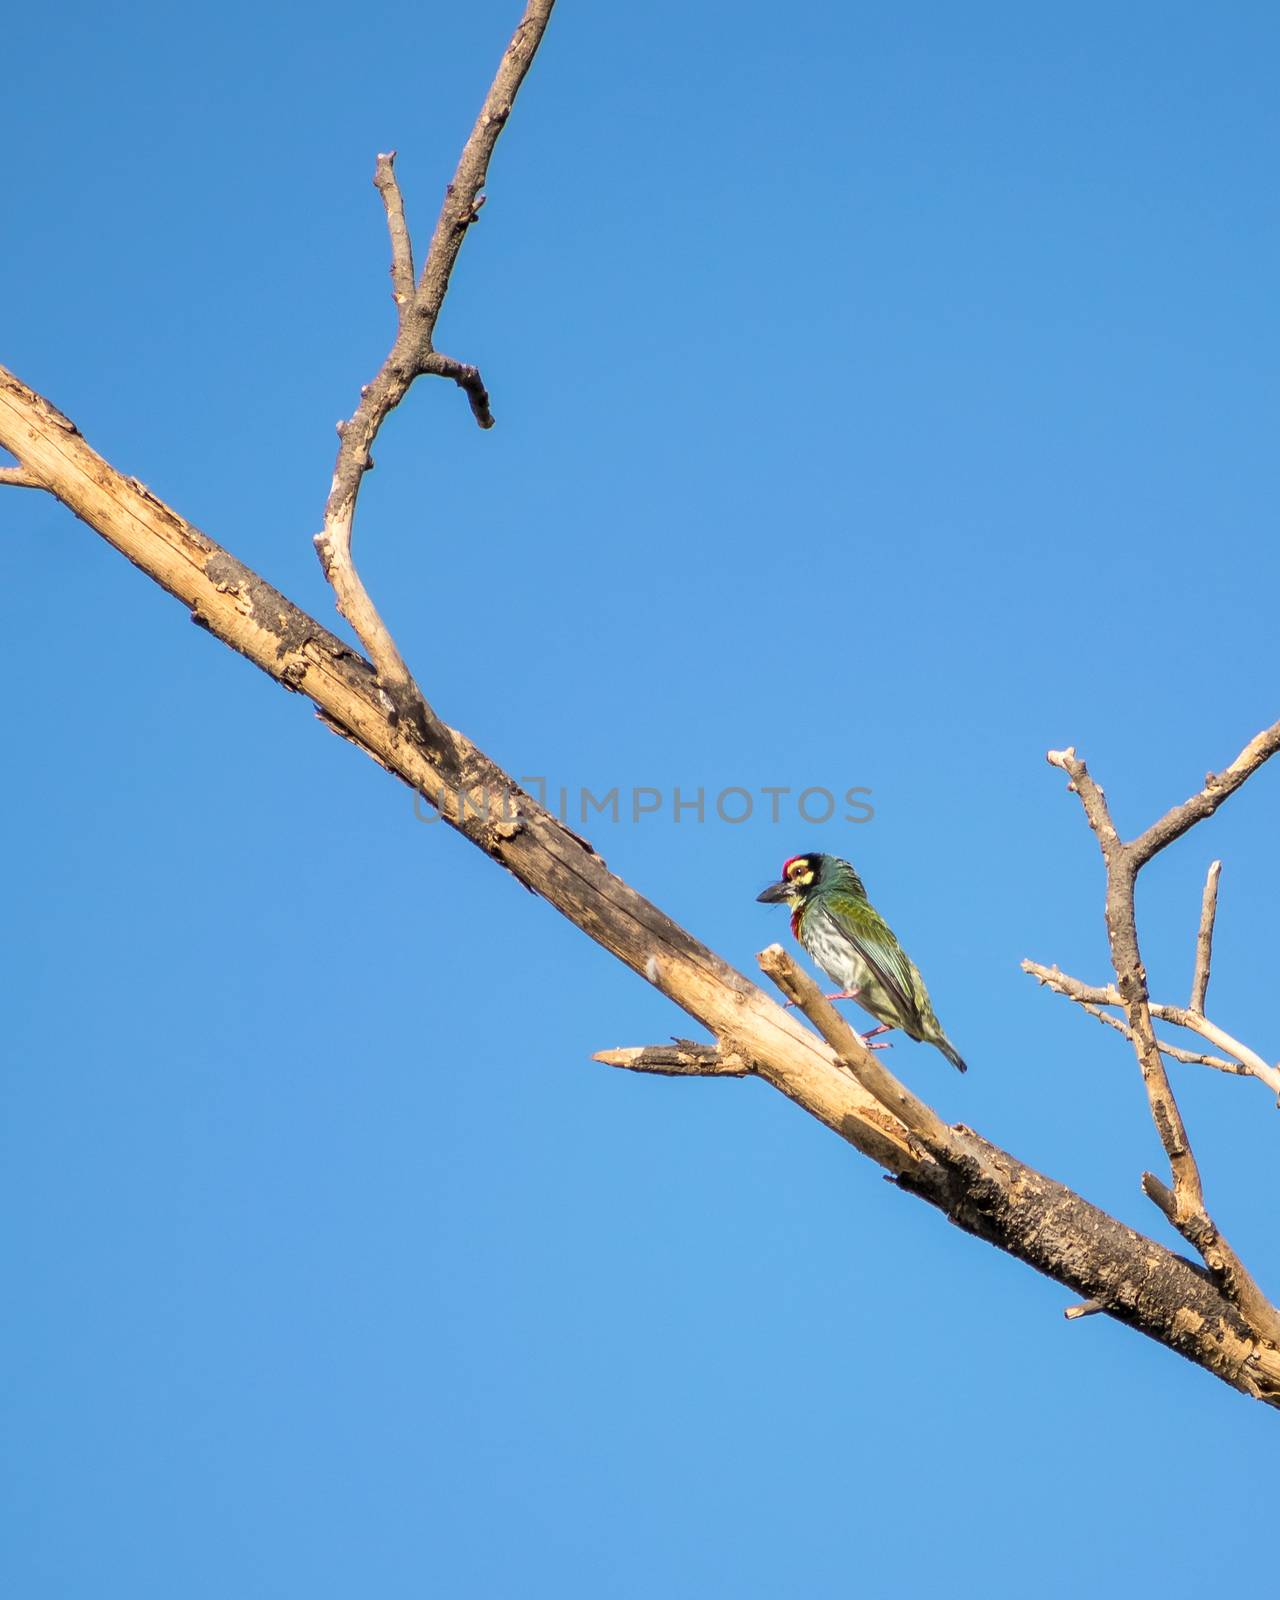 Isolated image of copper smith barbet bird, sitting on a dry tree branch . by lalam